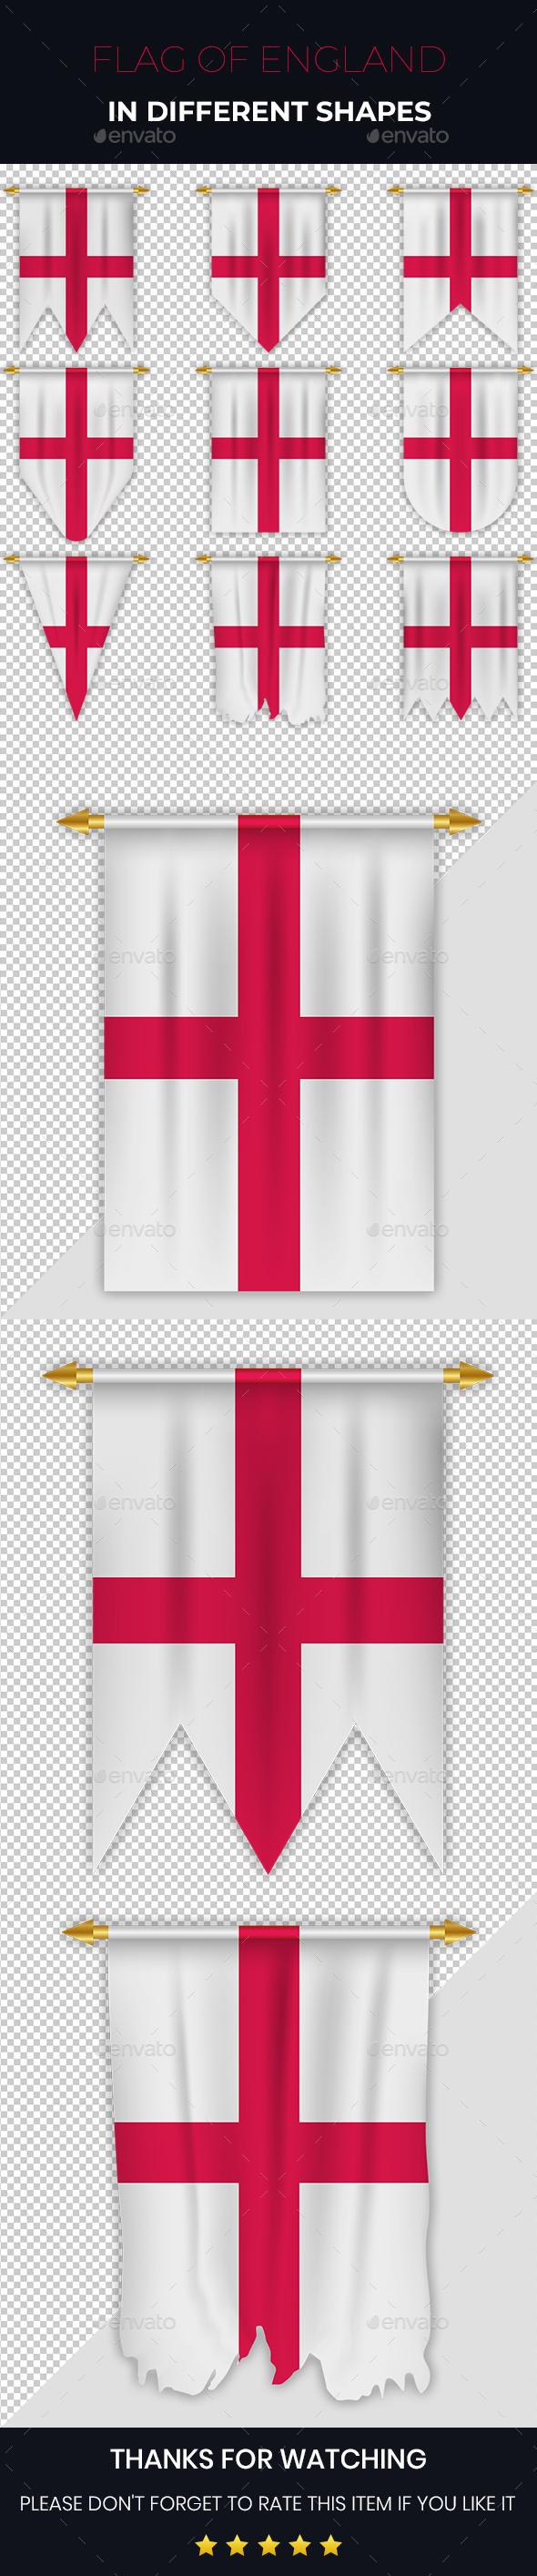 England Flag In Different Shapes